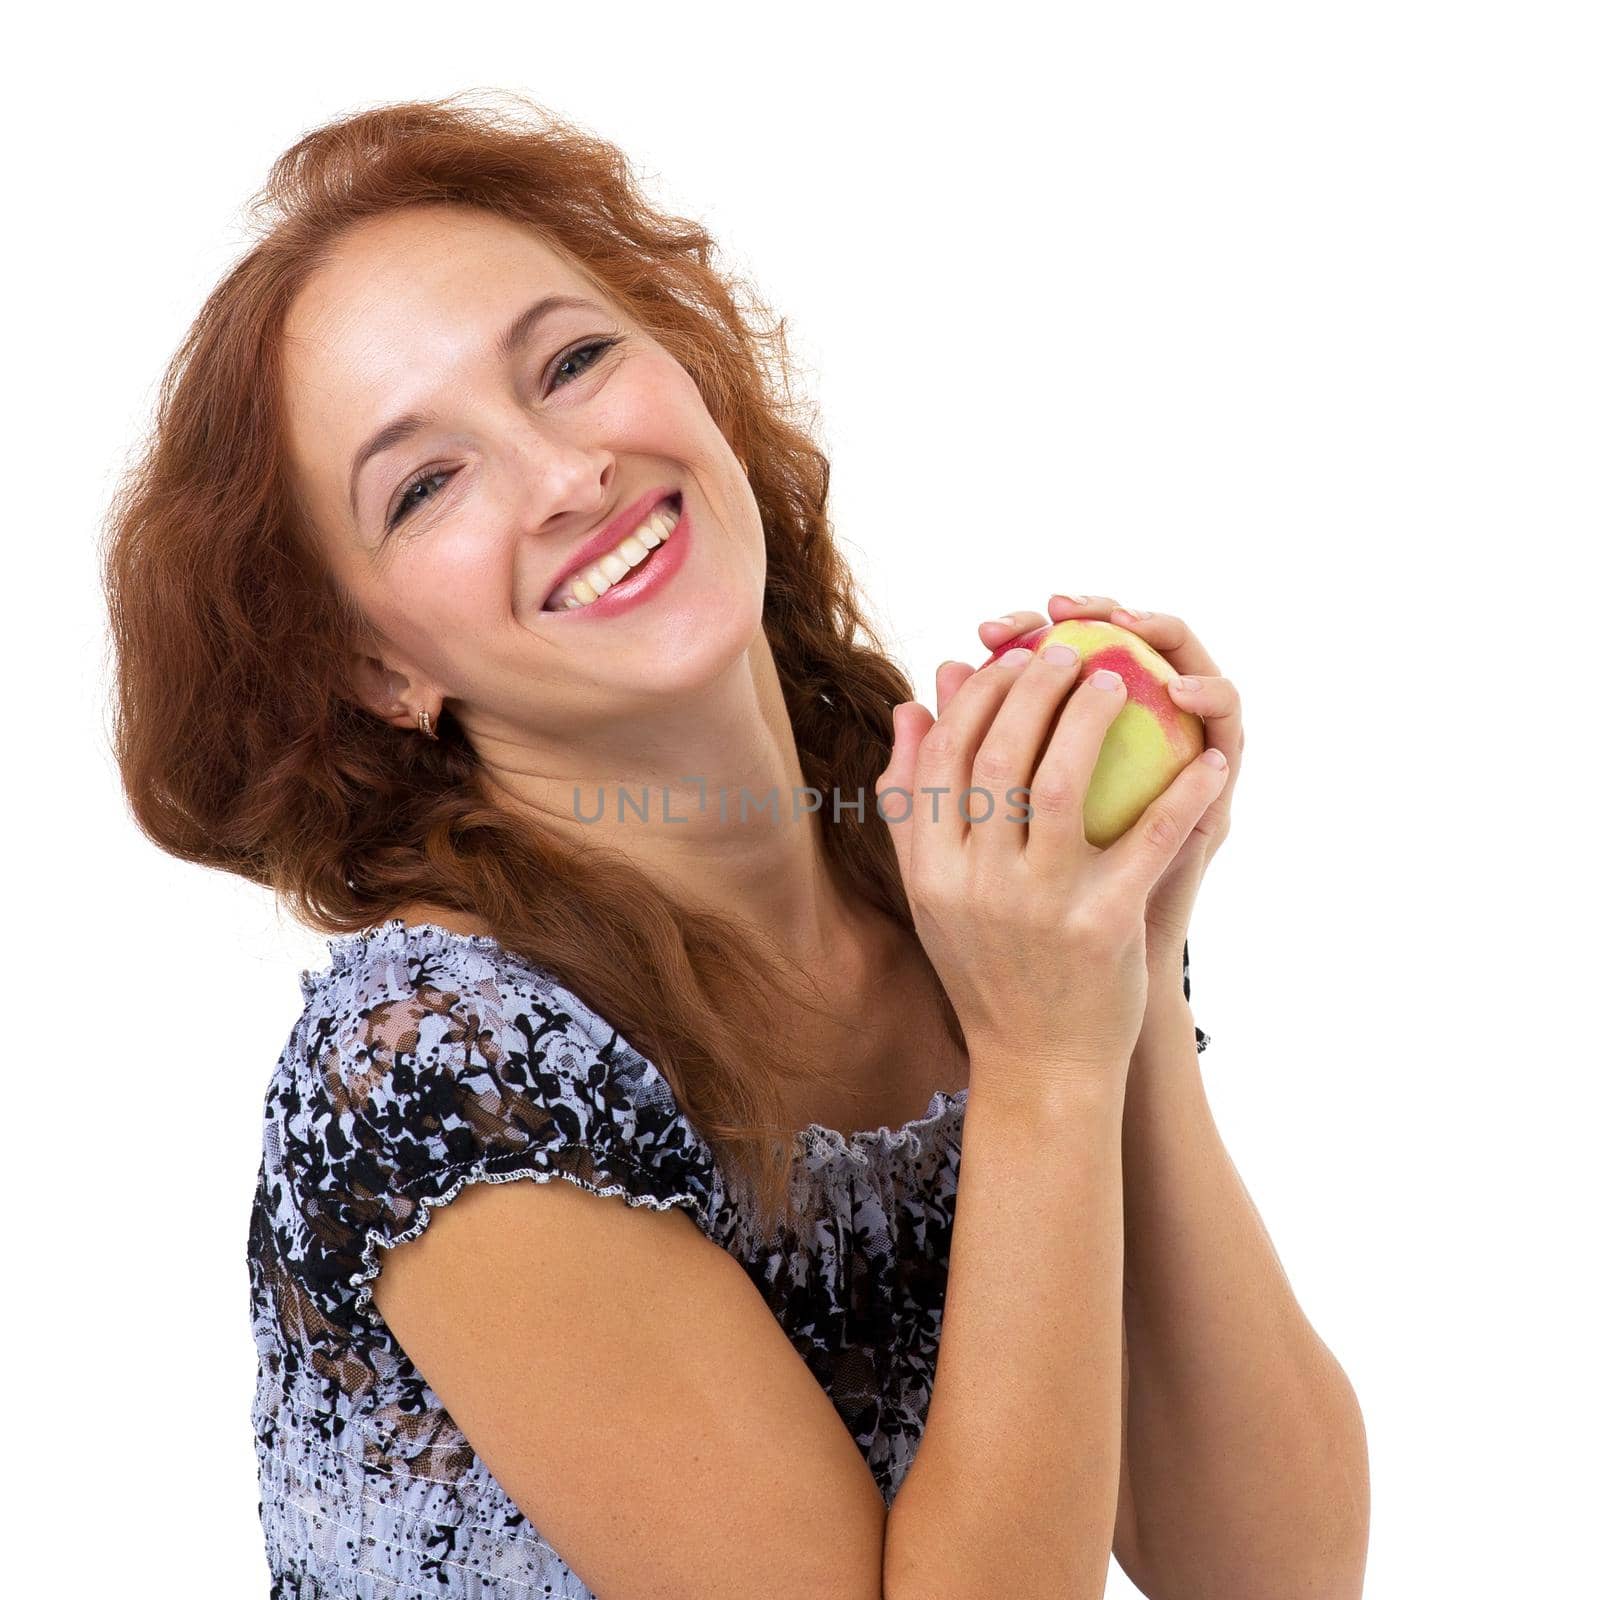 Happy woman holding fresh red apple. Portrait of cheerful girl smiling at camera on isolated white background with copy space. Healthy eating and diet concept